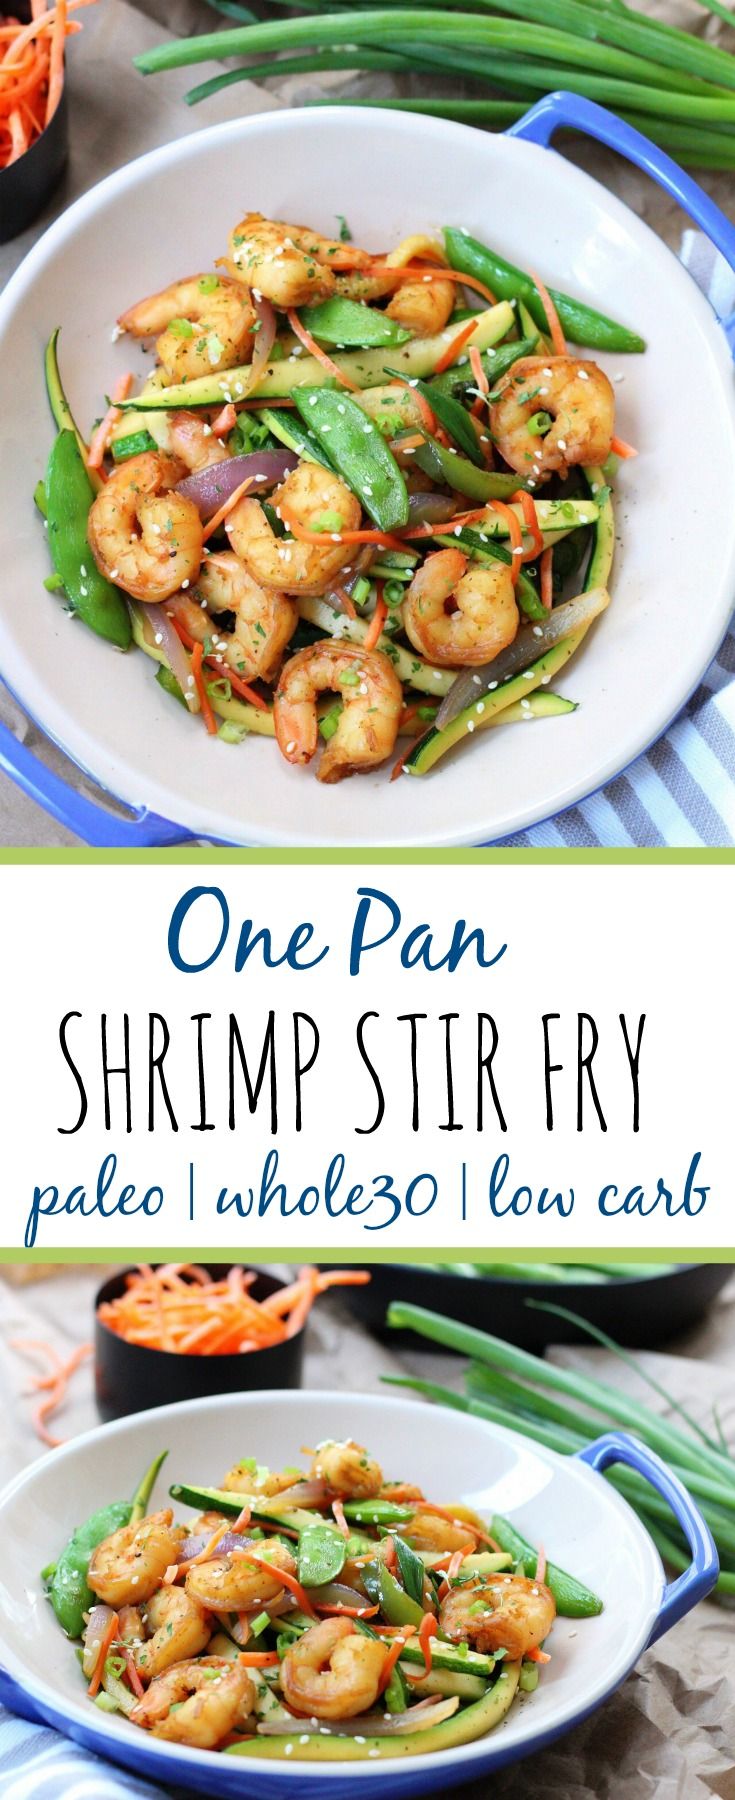 Healthy Recipes : This easy shrimp stir fry recipe is a great Whole30 ...